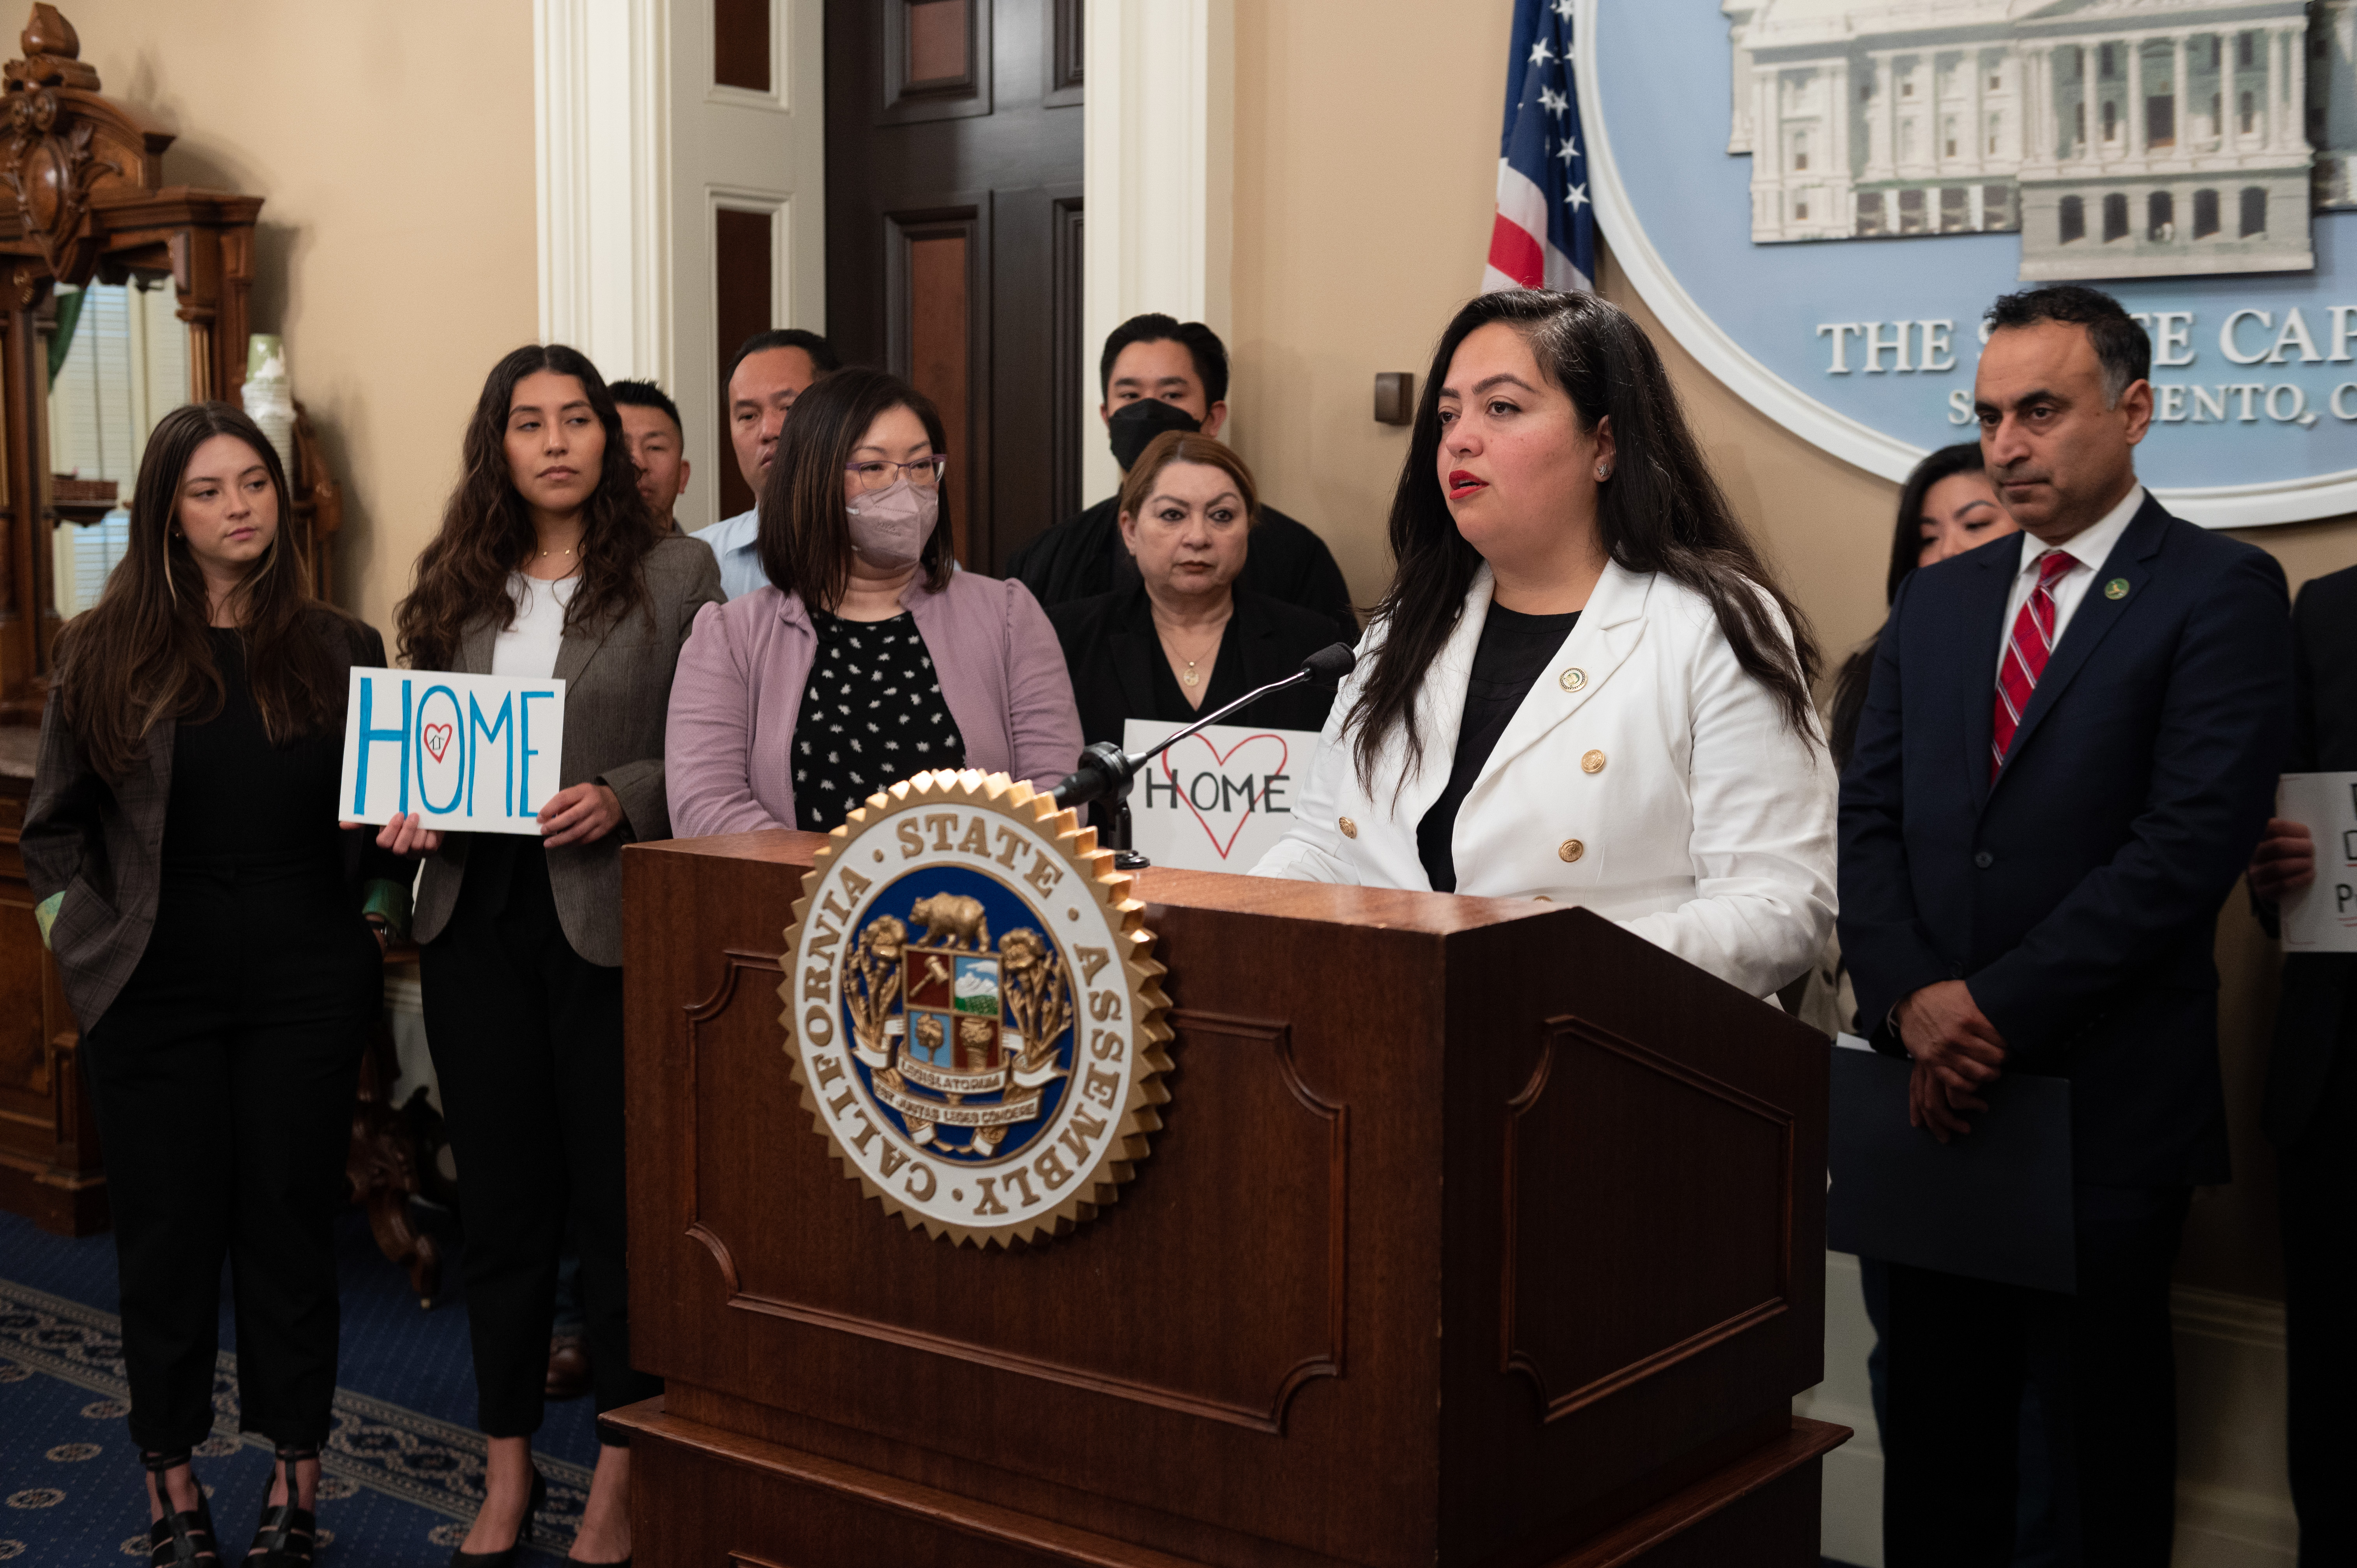 Assemblywoman Wendy Carrillo, joined by legislators and advocates, announced the launch of the HOME Act (AB 1306)